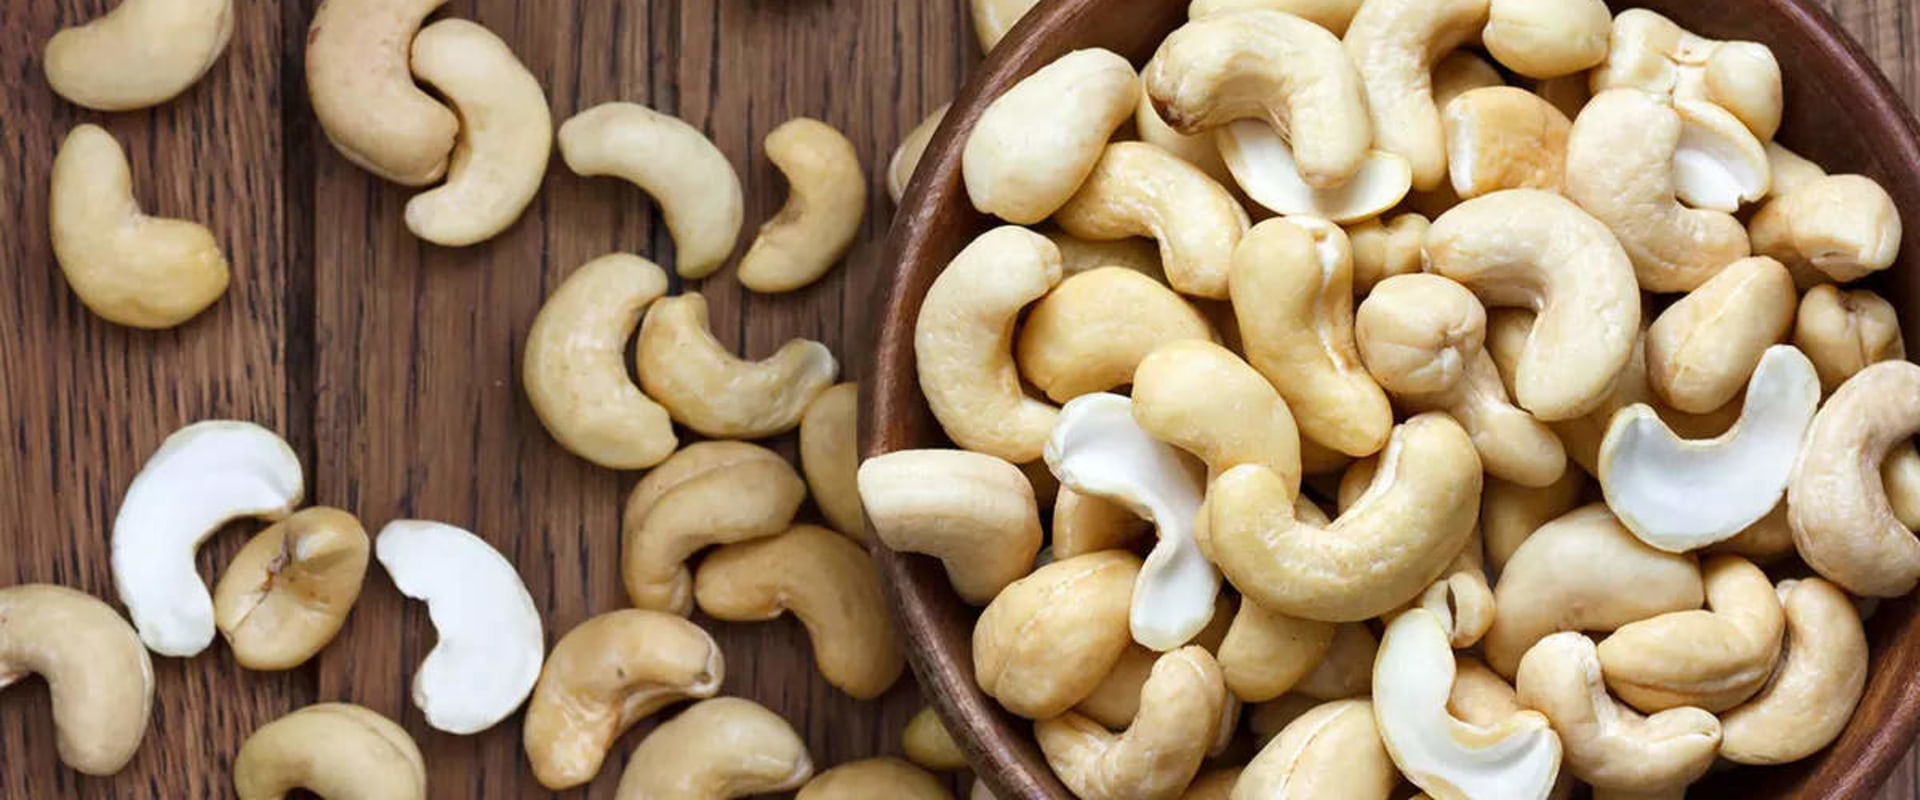 How can you tell if cashews are rancid?